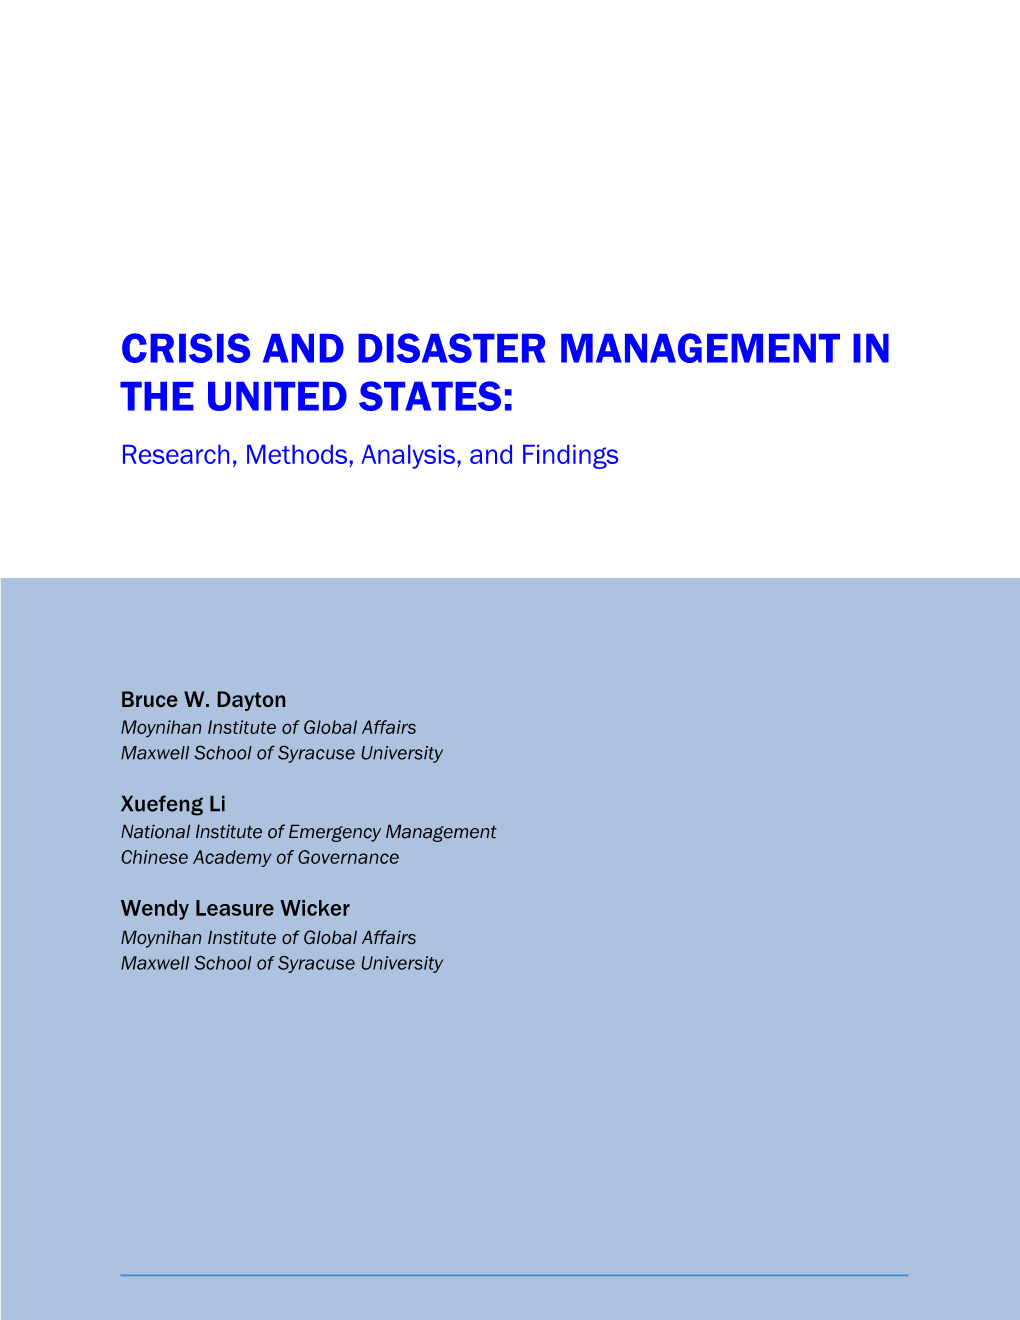 Crisis and Disaster Management in the United States: Research, Methods, Analysis, and Findings